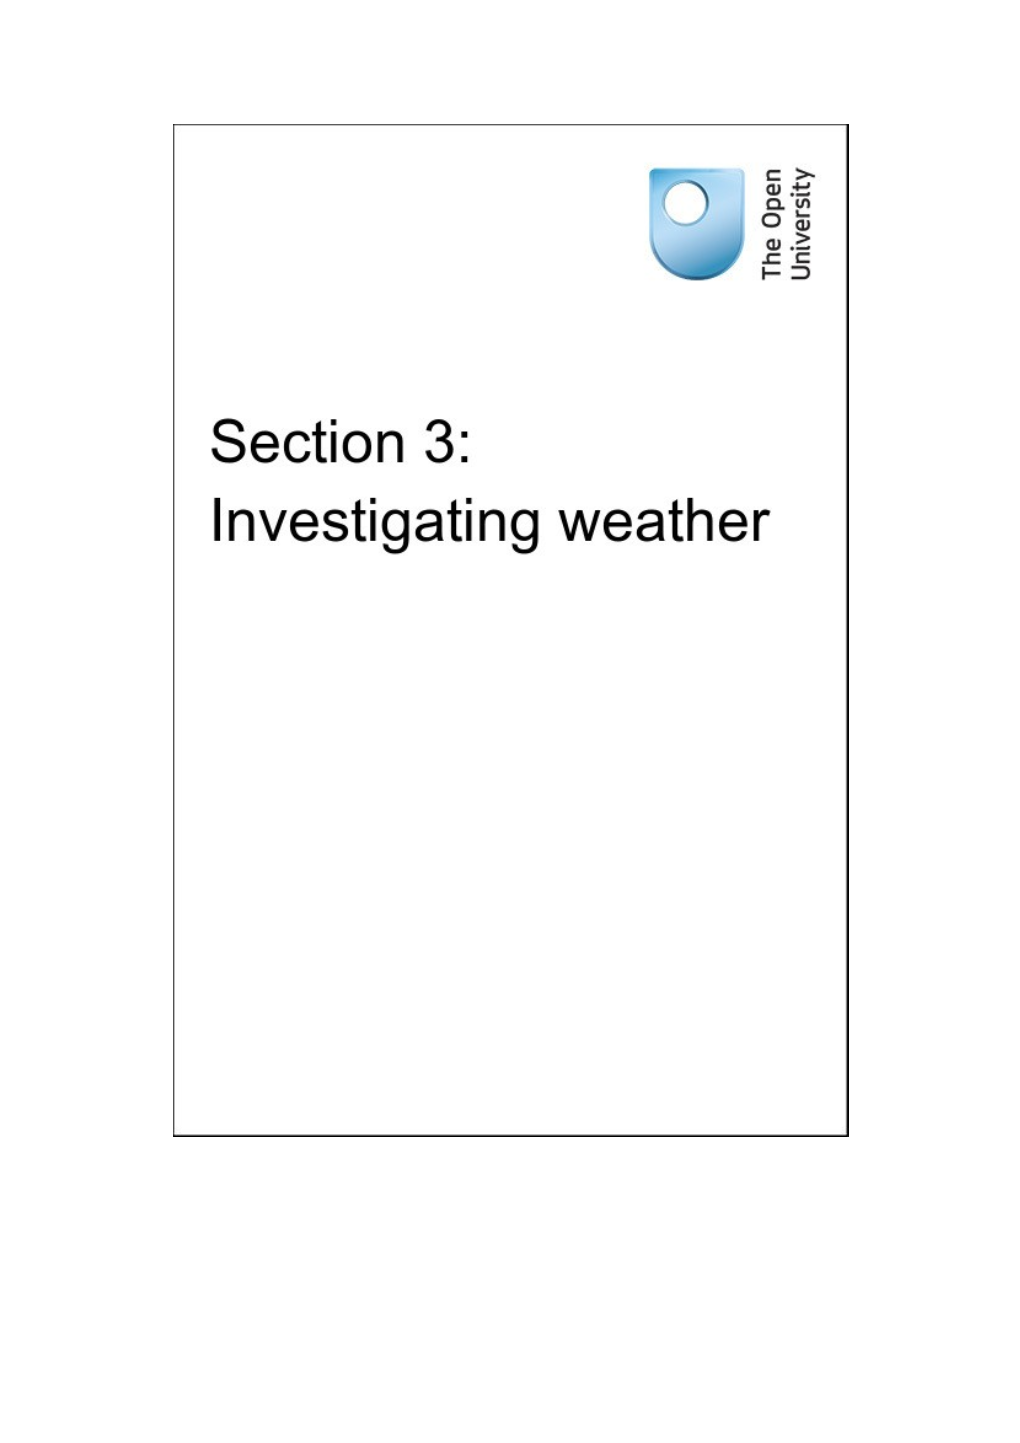 Section 3: Investigating Weather